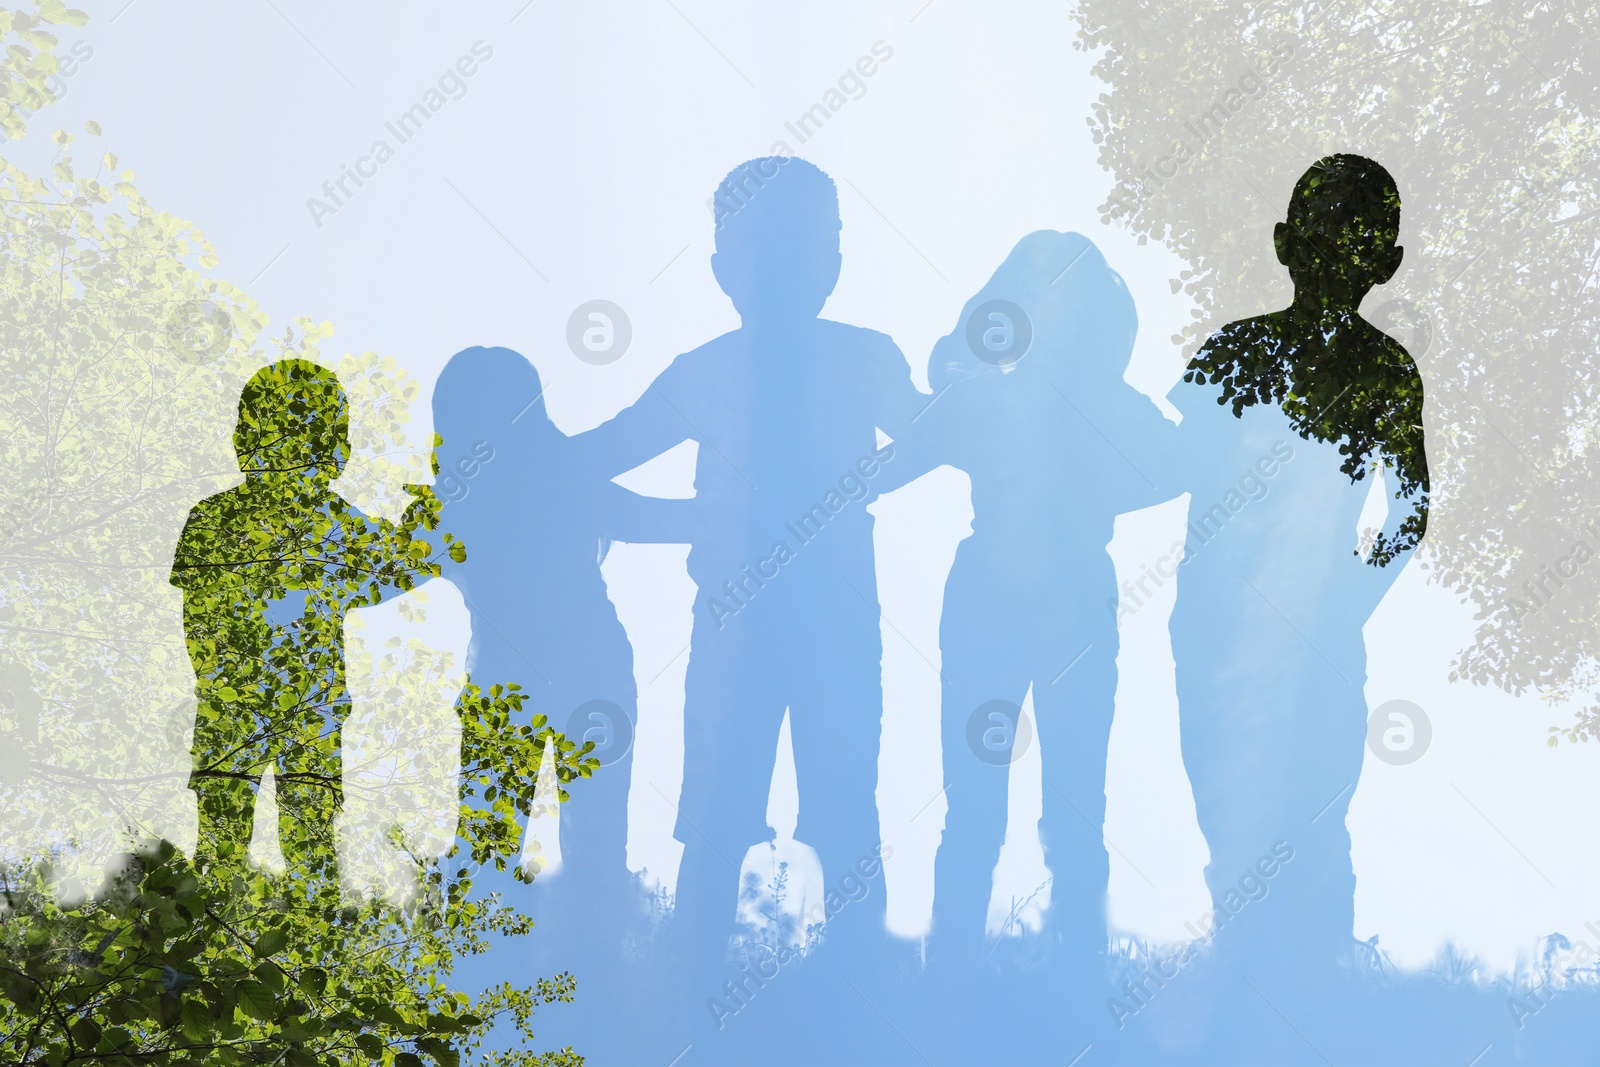 Image of Silhouettes of children, sky and trees outdoors, double exposure